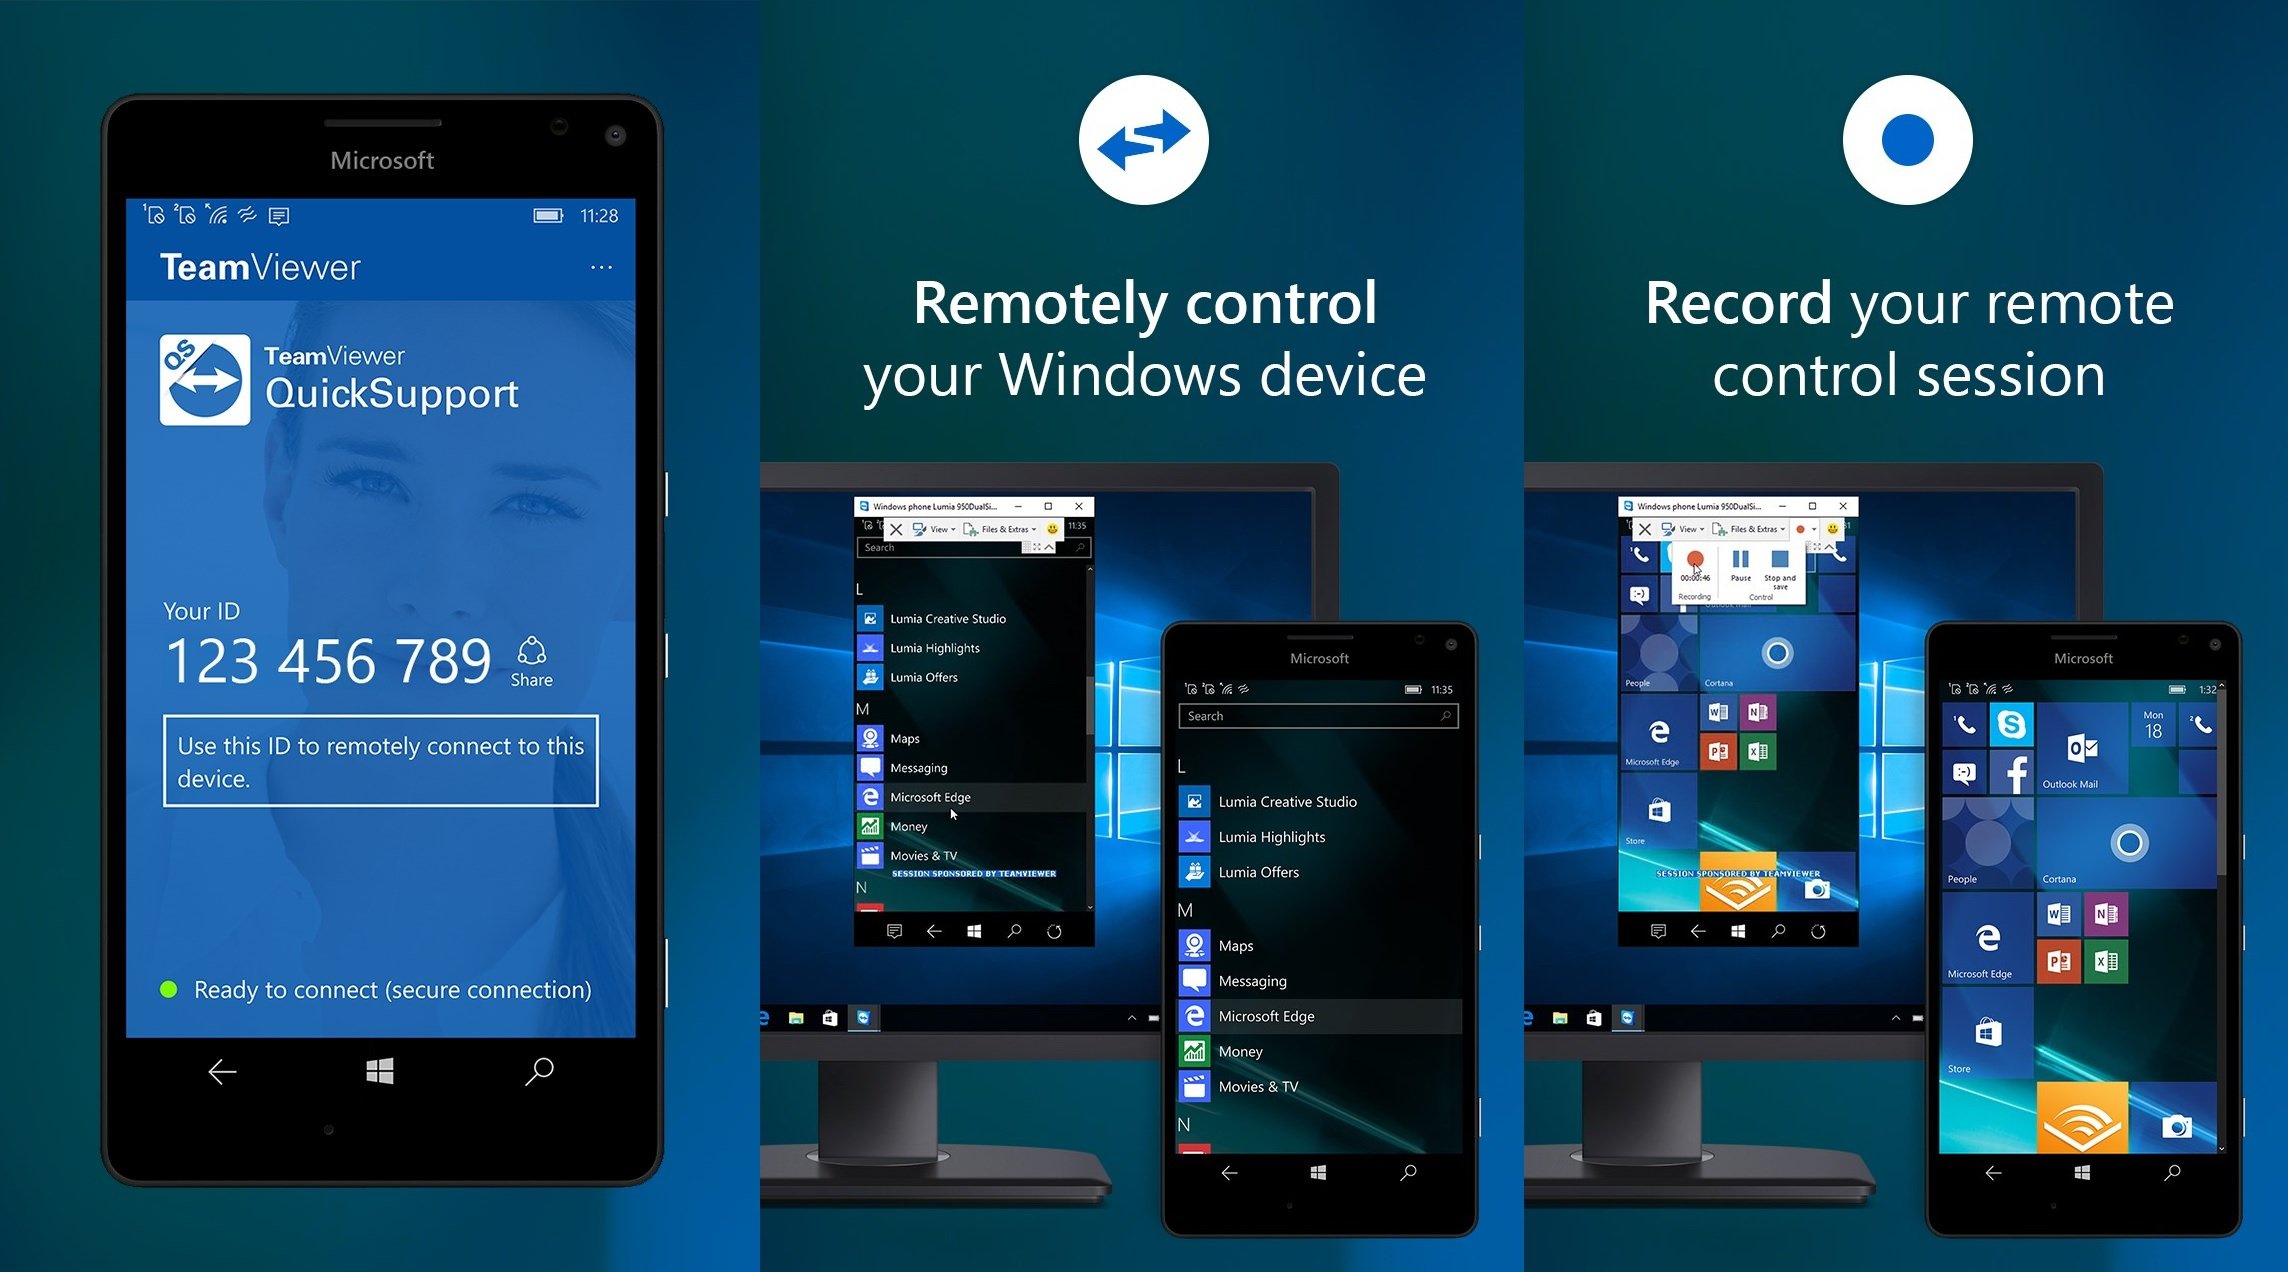 TeamViewer QuickSupport app now allows you to remotely control your Windows mobile device - MSPoweruser